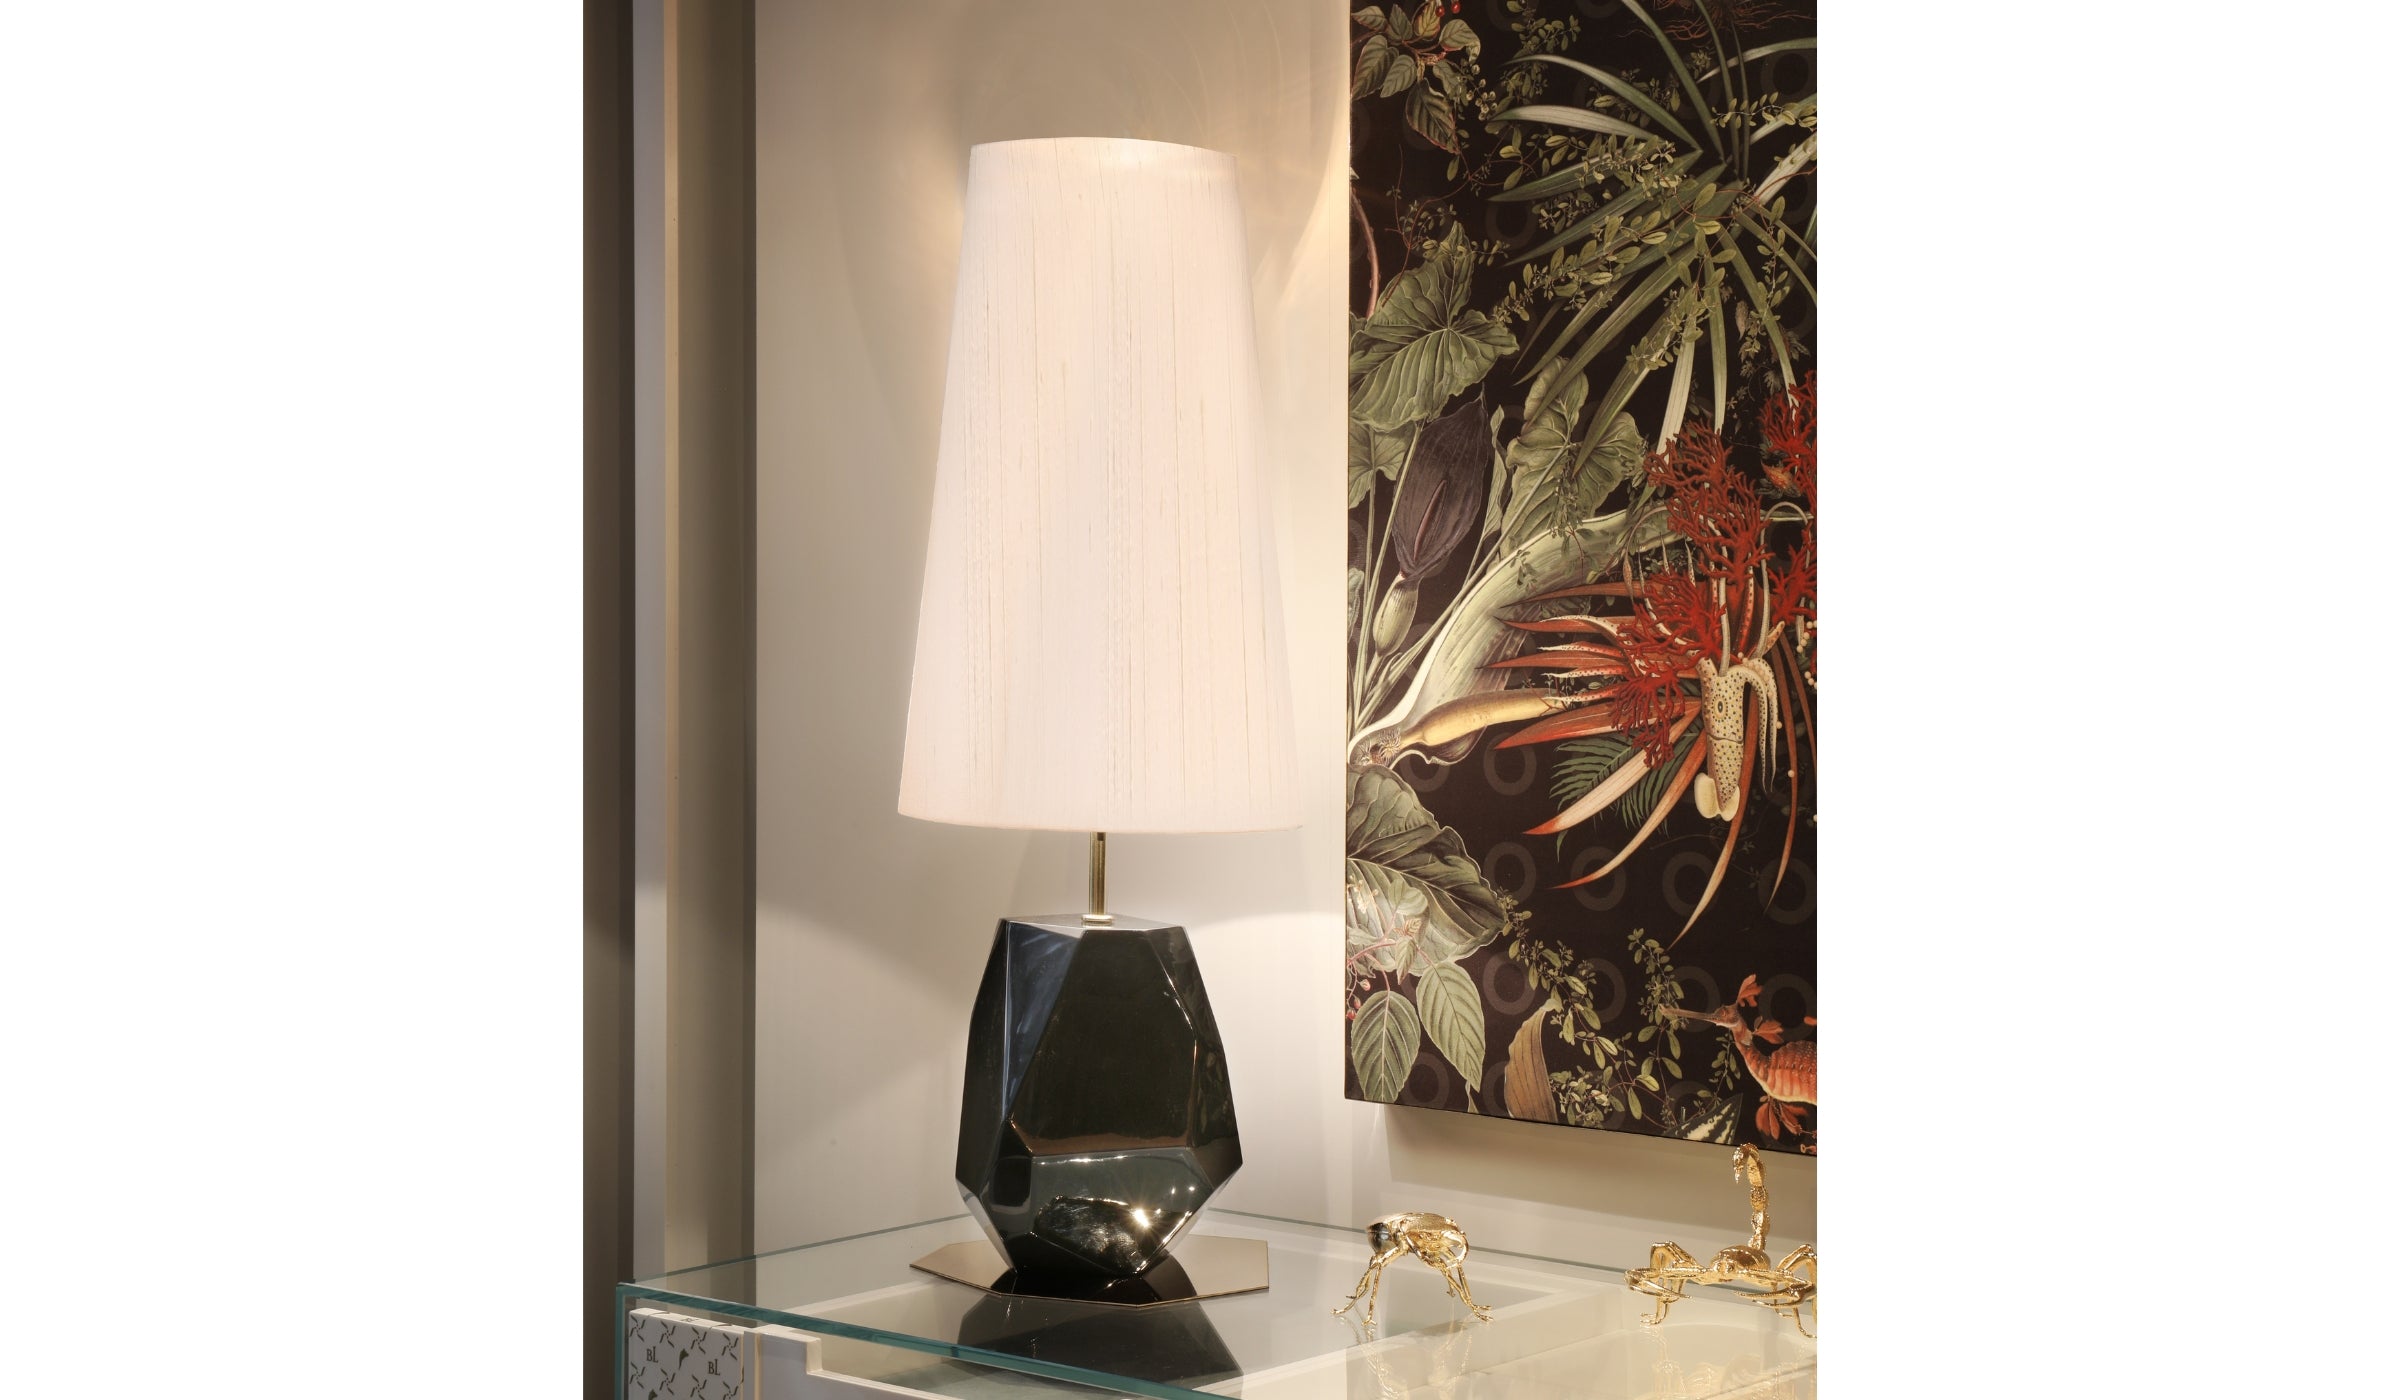 Feel Small - Table lamp, designer lighting in stainless steel and silk